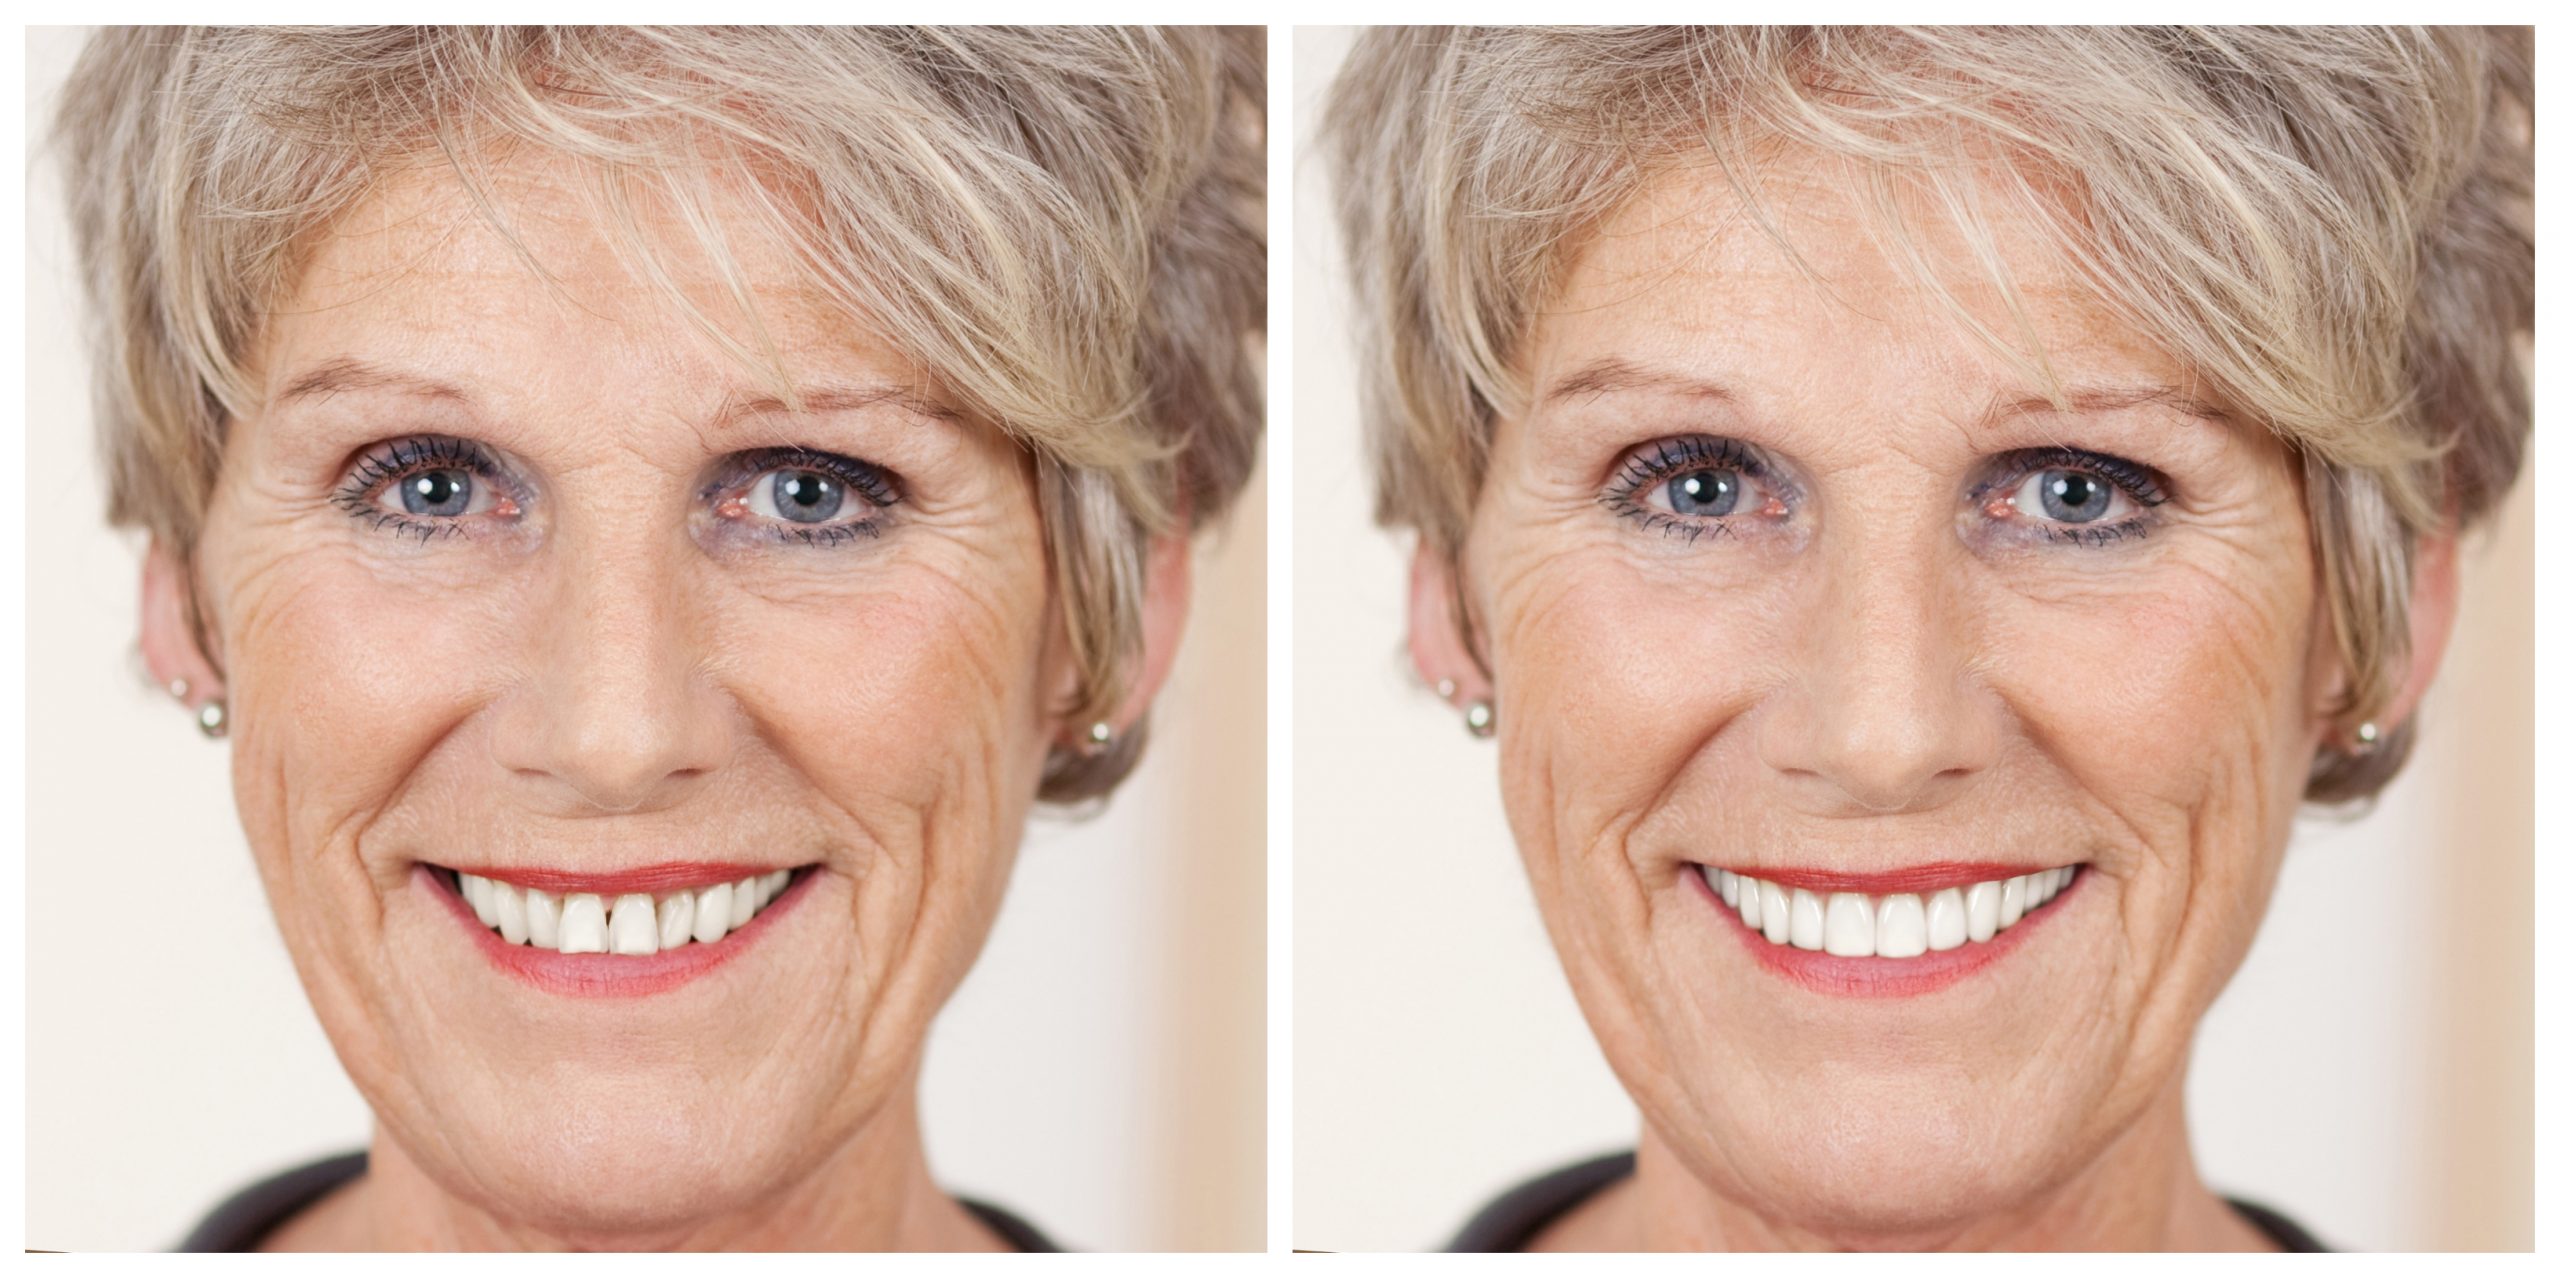 Smile Restoration - Before and After6